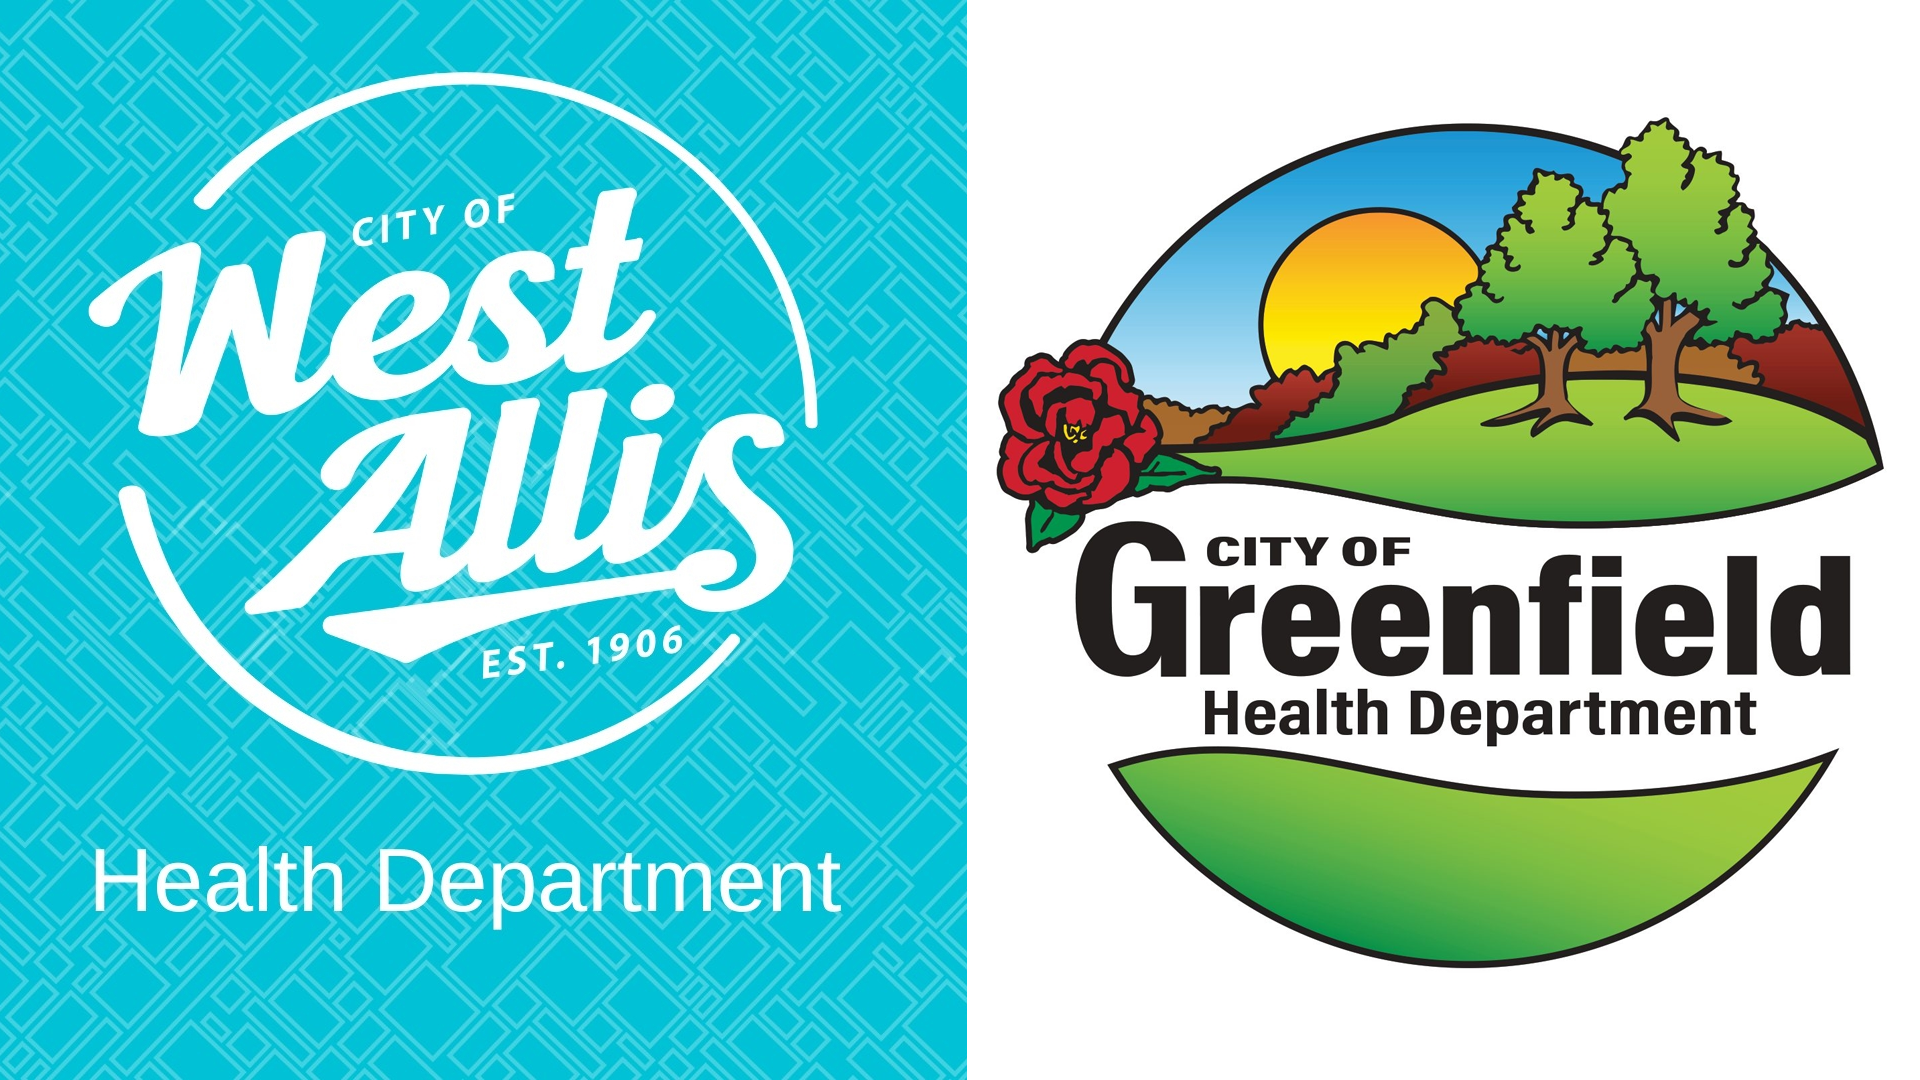 Merger of Greenfield and West Allis Health Departments